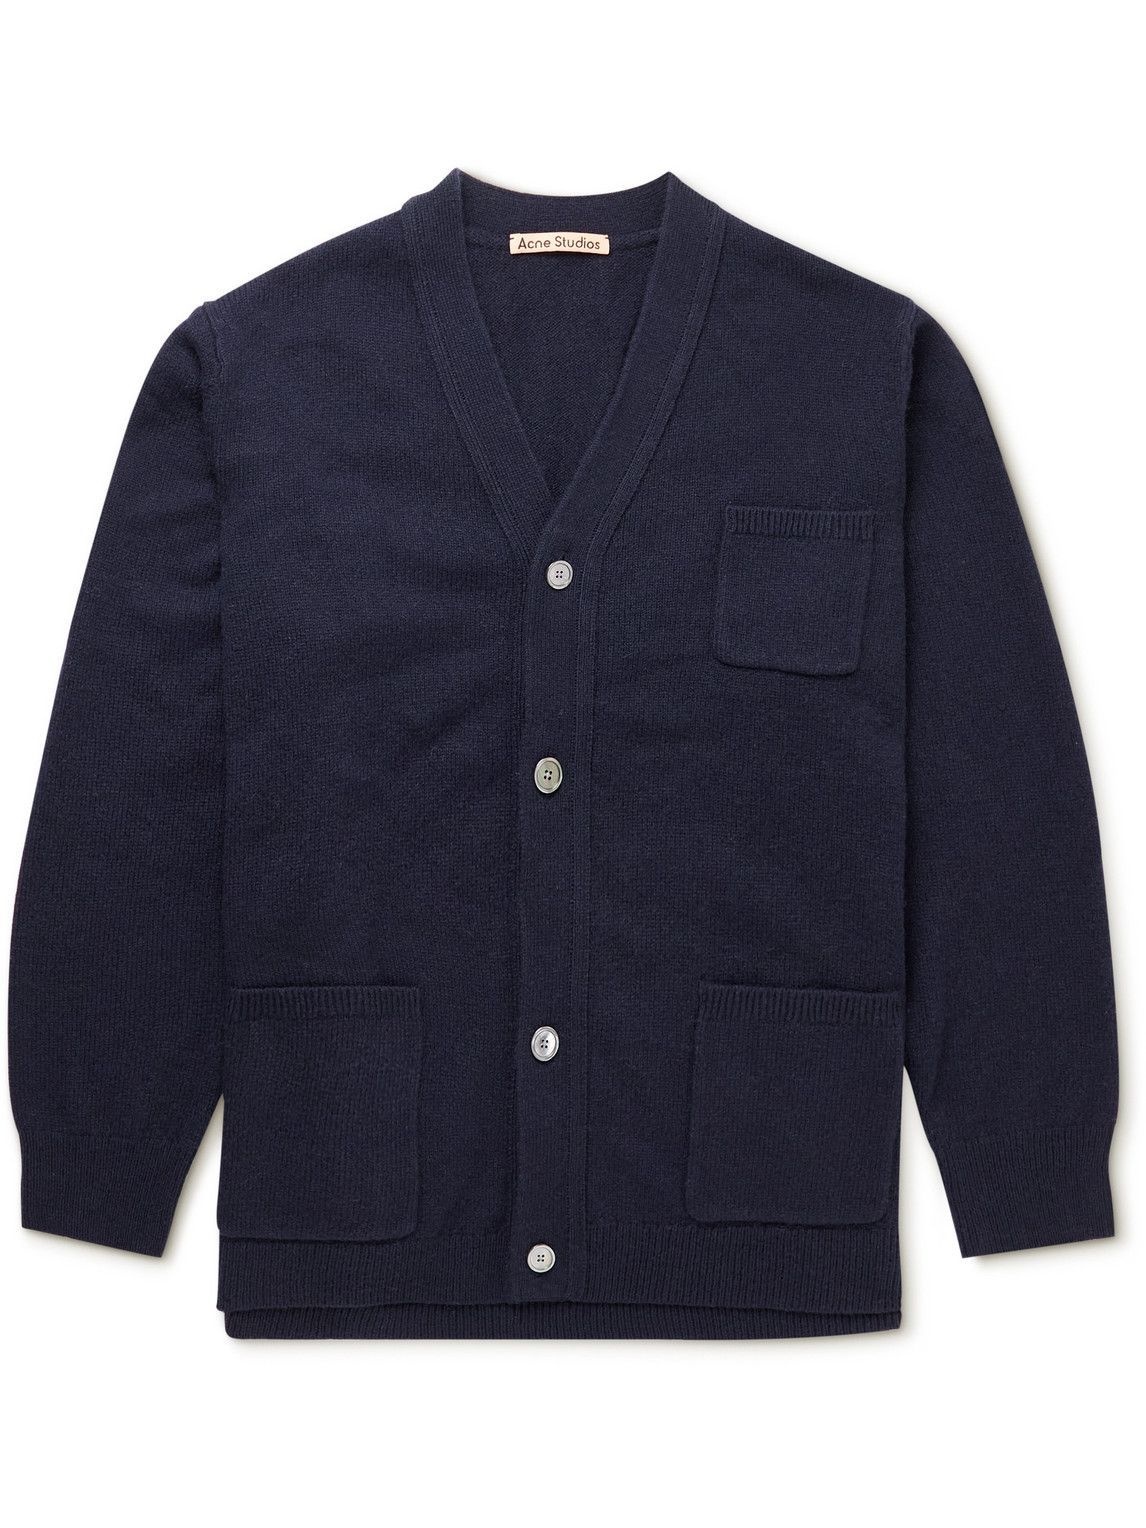 Acne Studios - Wool and Cashmere-Blend Cardigan - Blue Acne Studios